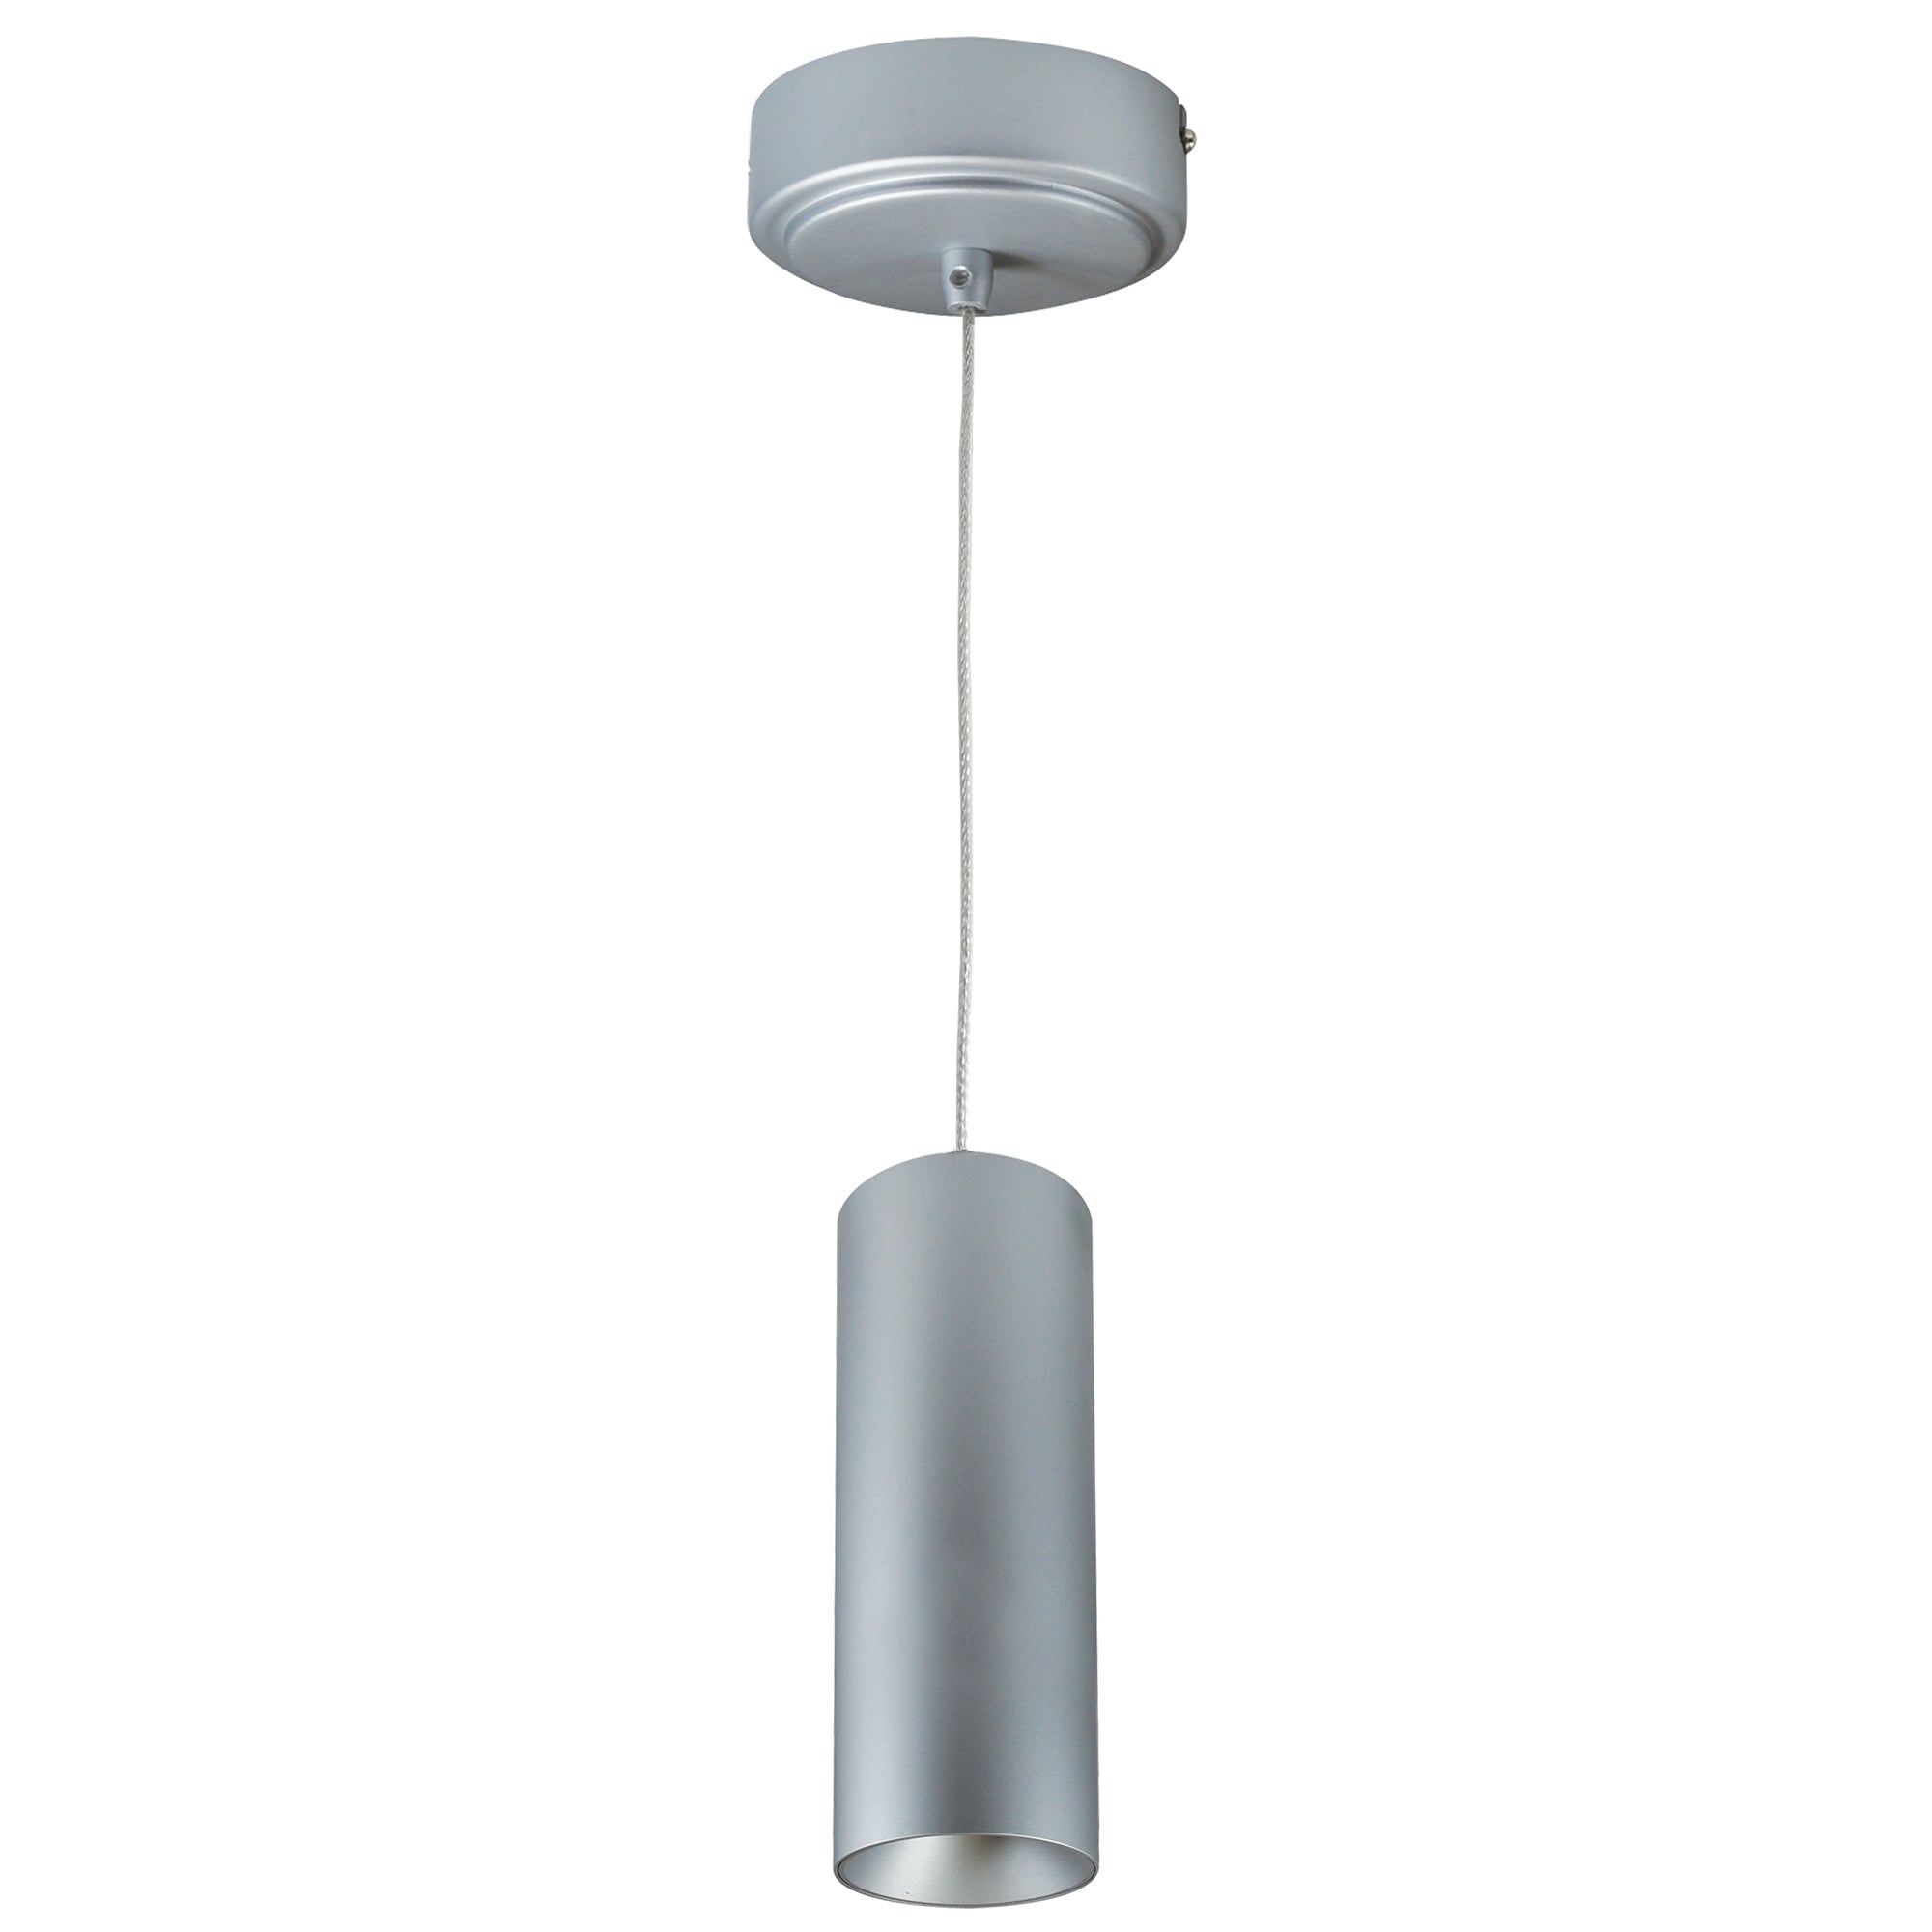 Nora Lighting LE56 - NYLM-2C35XSSLE4A - Cylinder - Silver